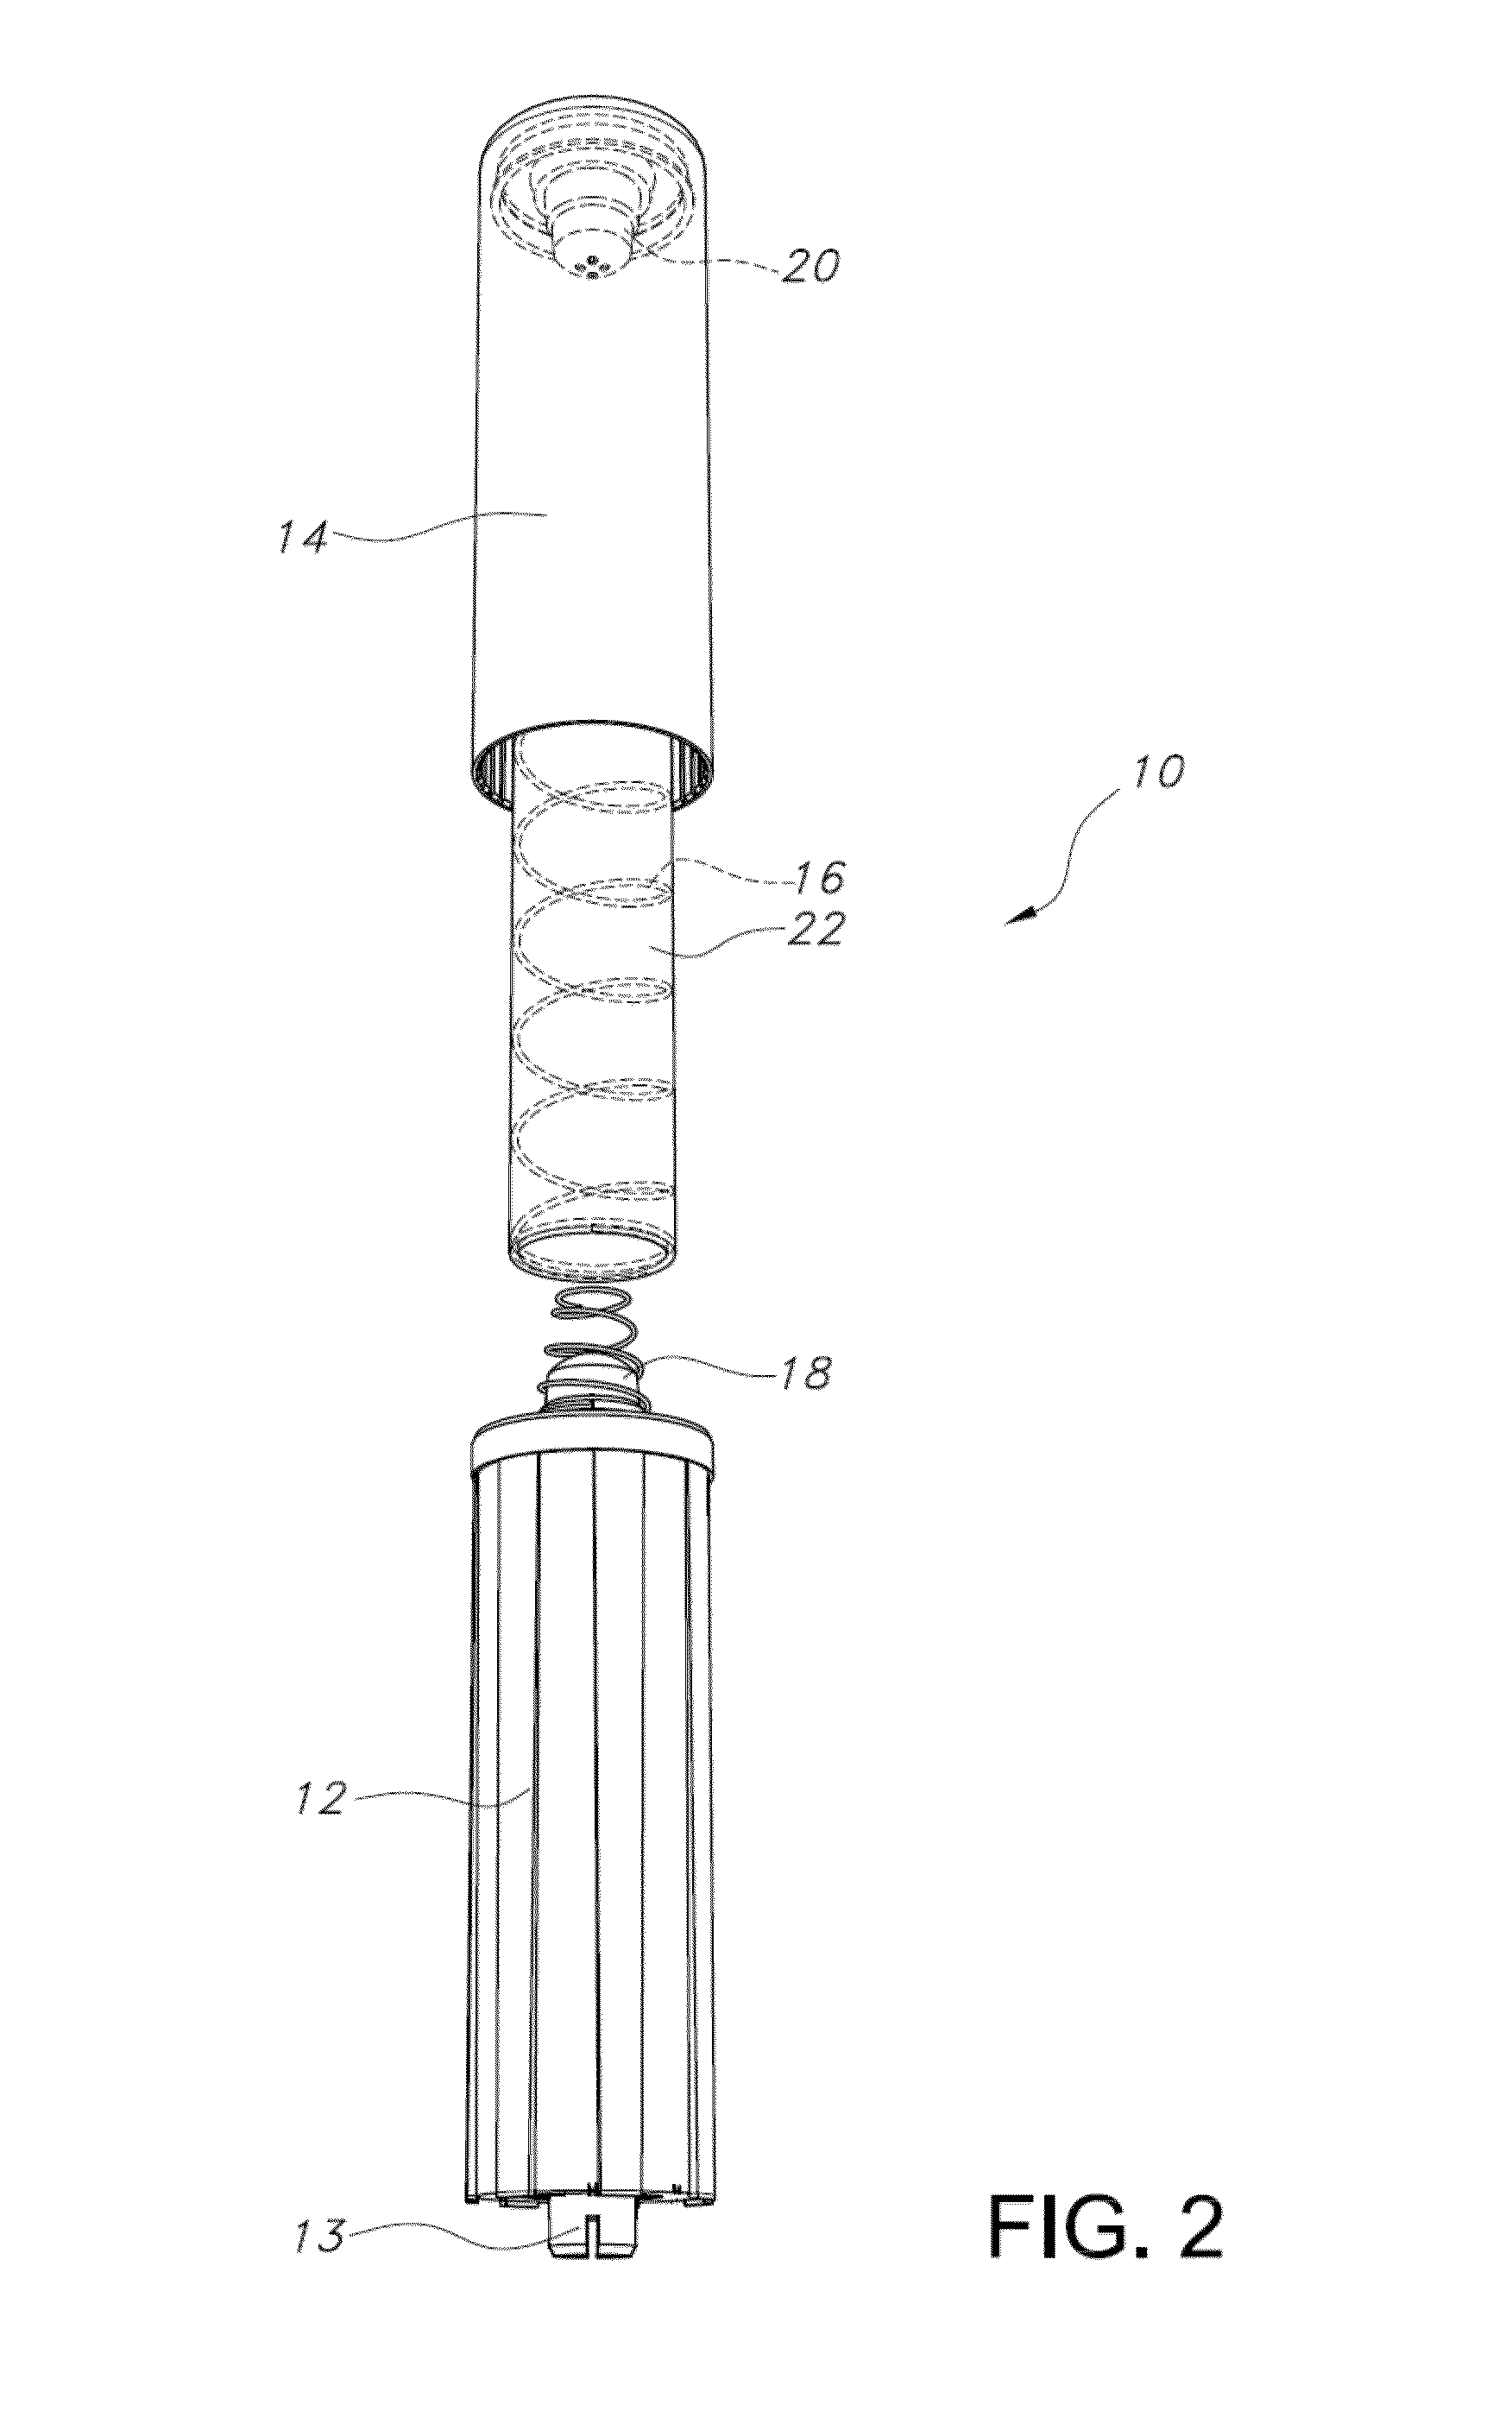 Telescoping spring assembly for mattresses and the like